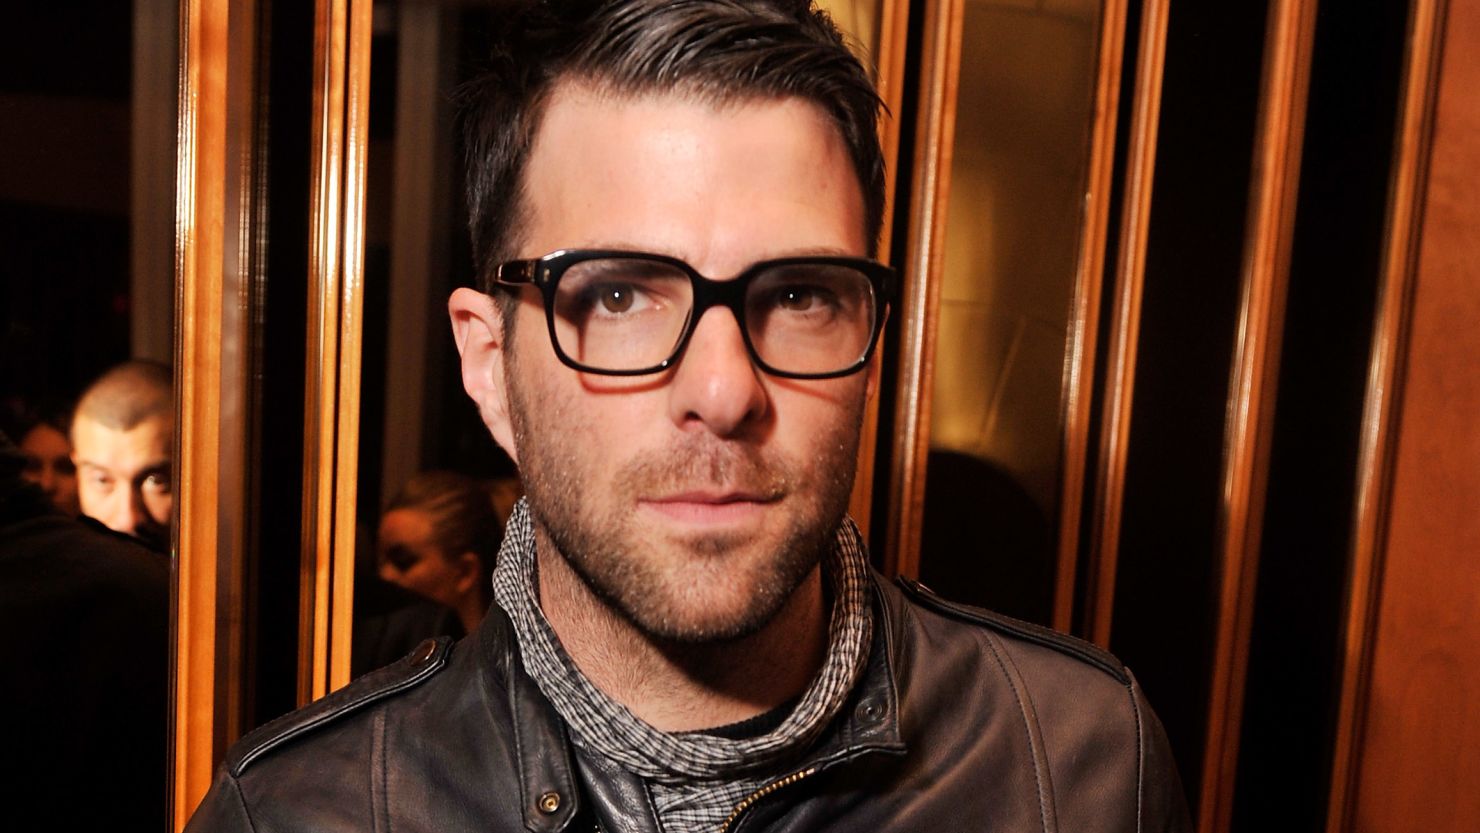 Zachary Quinto says of his relationship with Jonathan Groff:  "I'm incredibly happy, I'm incredibly lucky."